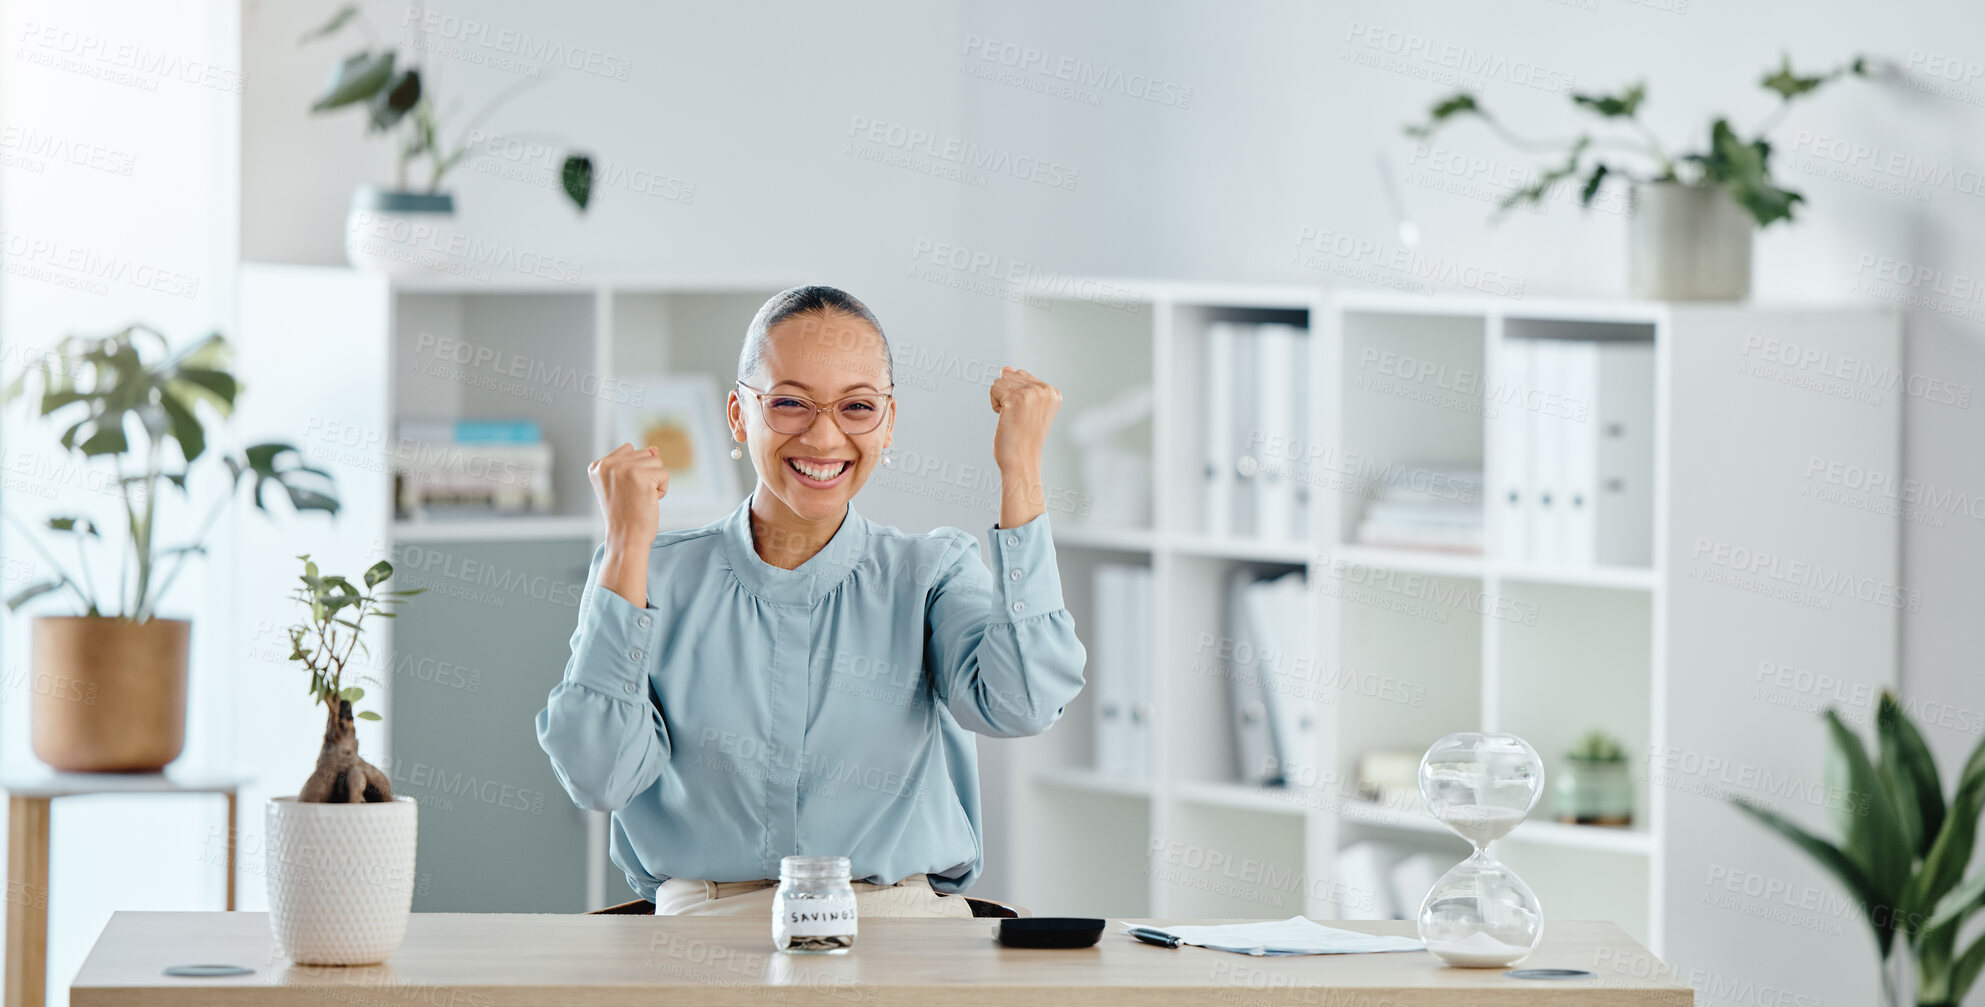 Buy stock photo Celebrating, happy and smiling accountant looking cheerful, joyful and excited after reaching savings target at work. Portrait of female professional cheering for success after achieving finance goal